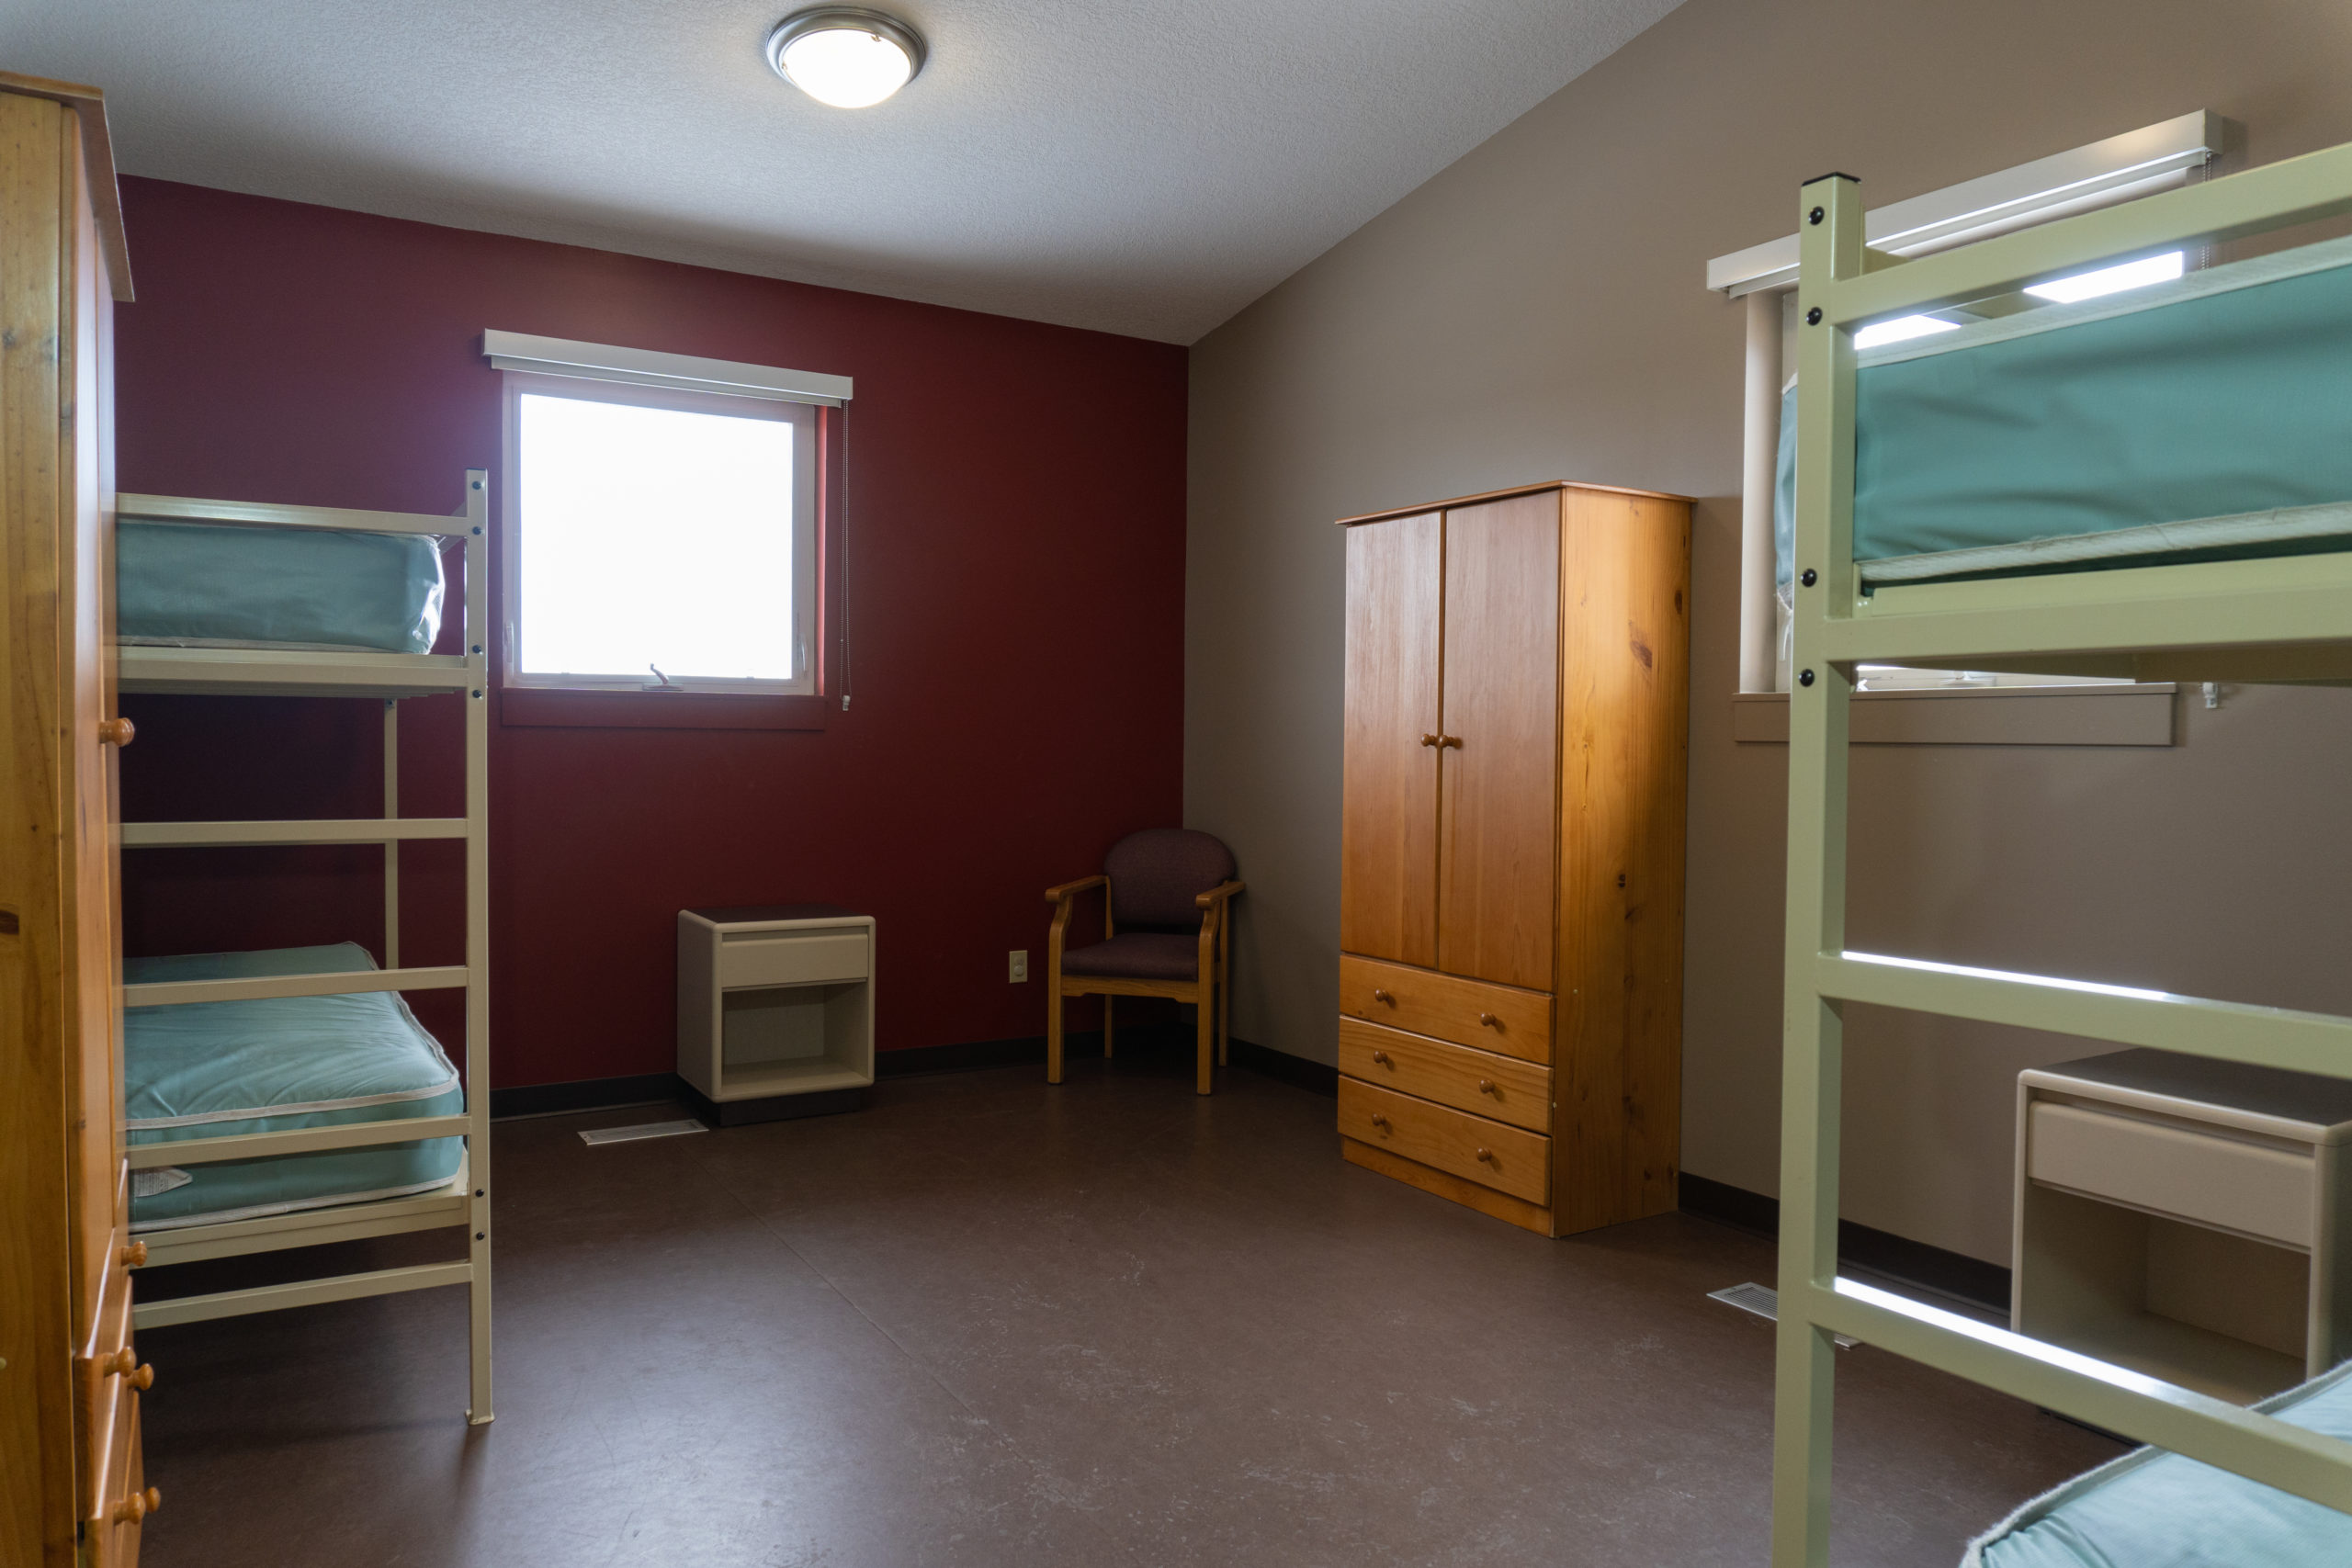 L Counsellor Room 1 - The Salvation Army's Pine Lake Camp